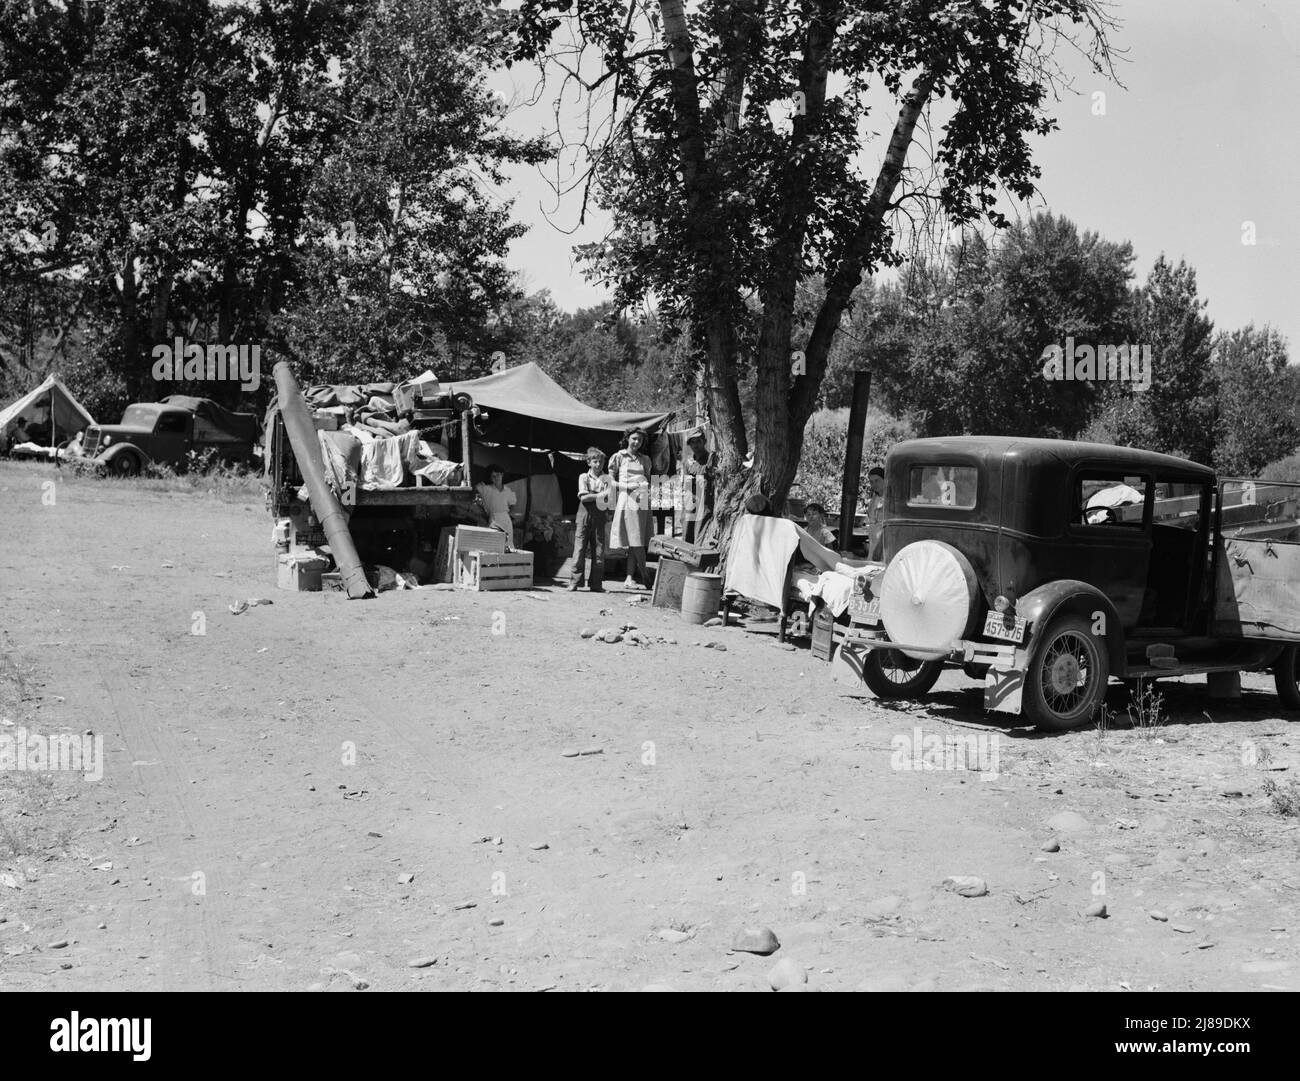 Washington, Yakima Valley. Camp of migratory families in &quot;Ramblers Park.&quot;. Stock Photo